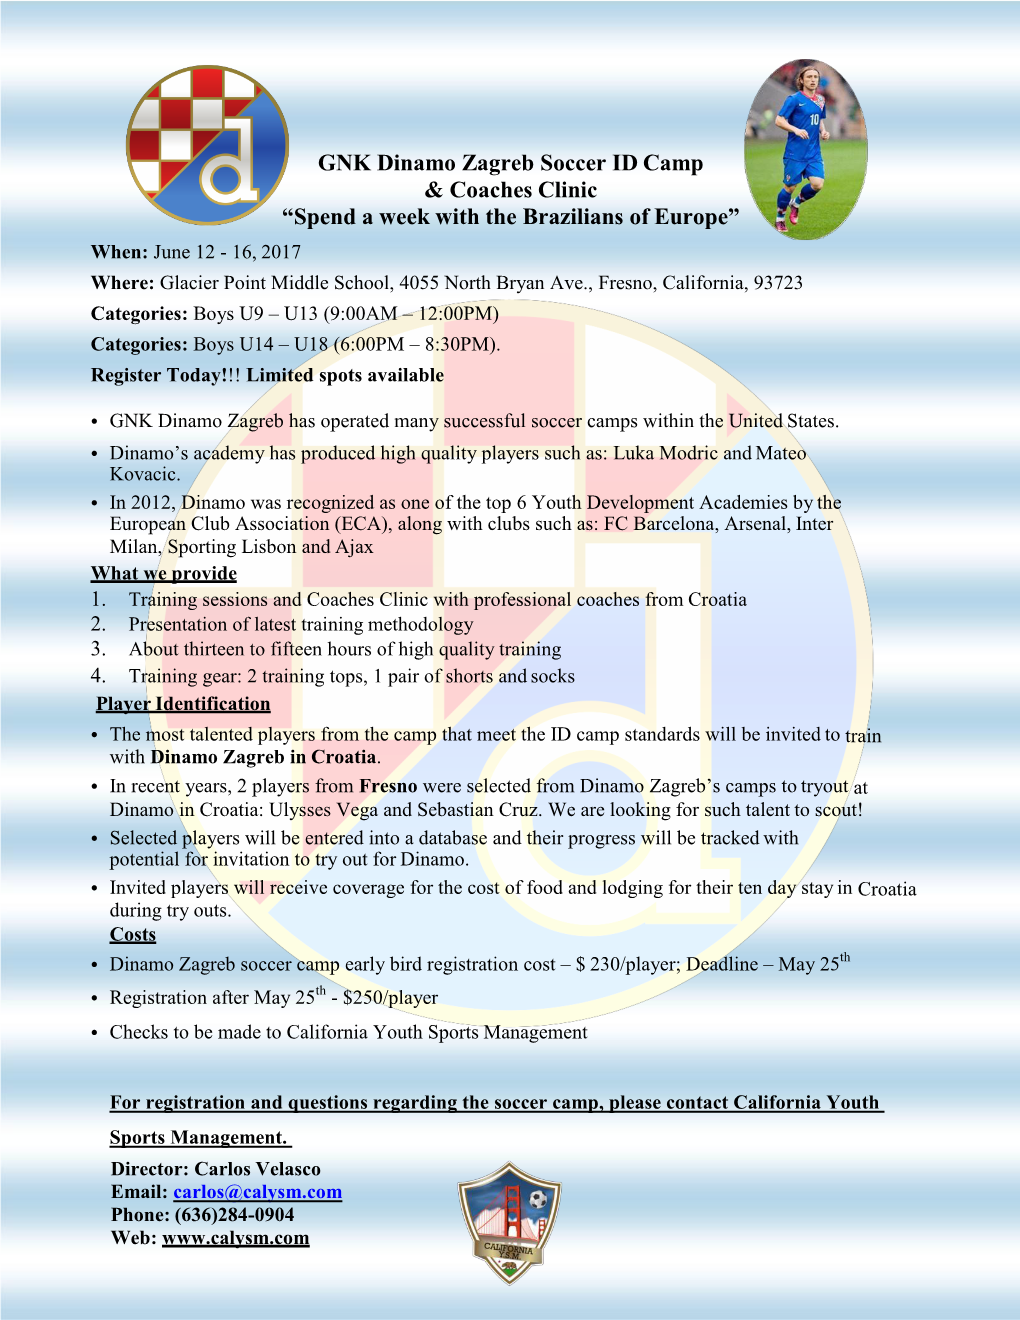 GNK Dinamo Zagreb Soccer ID Camp & Coaches Clinic “Spend a Week